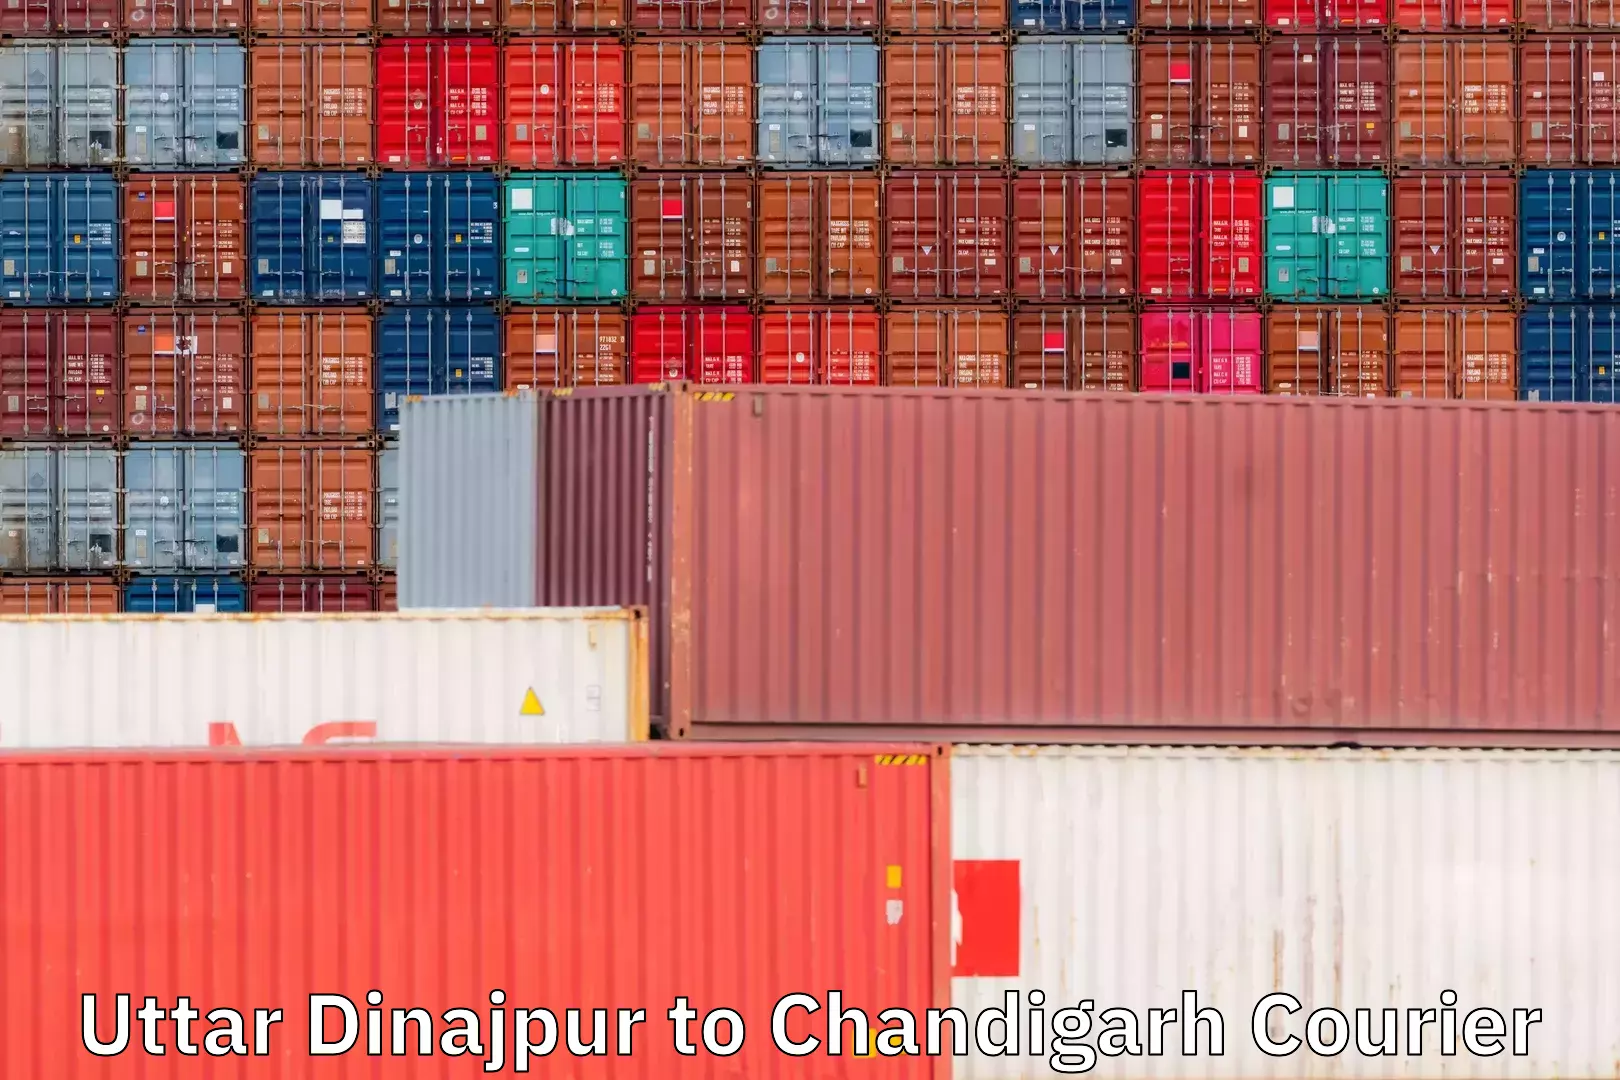 Automated shipping Uttar Dinajpur to Chandigarh